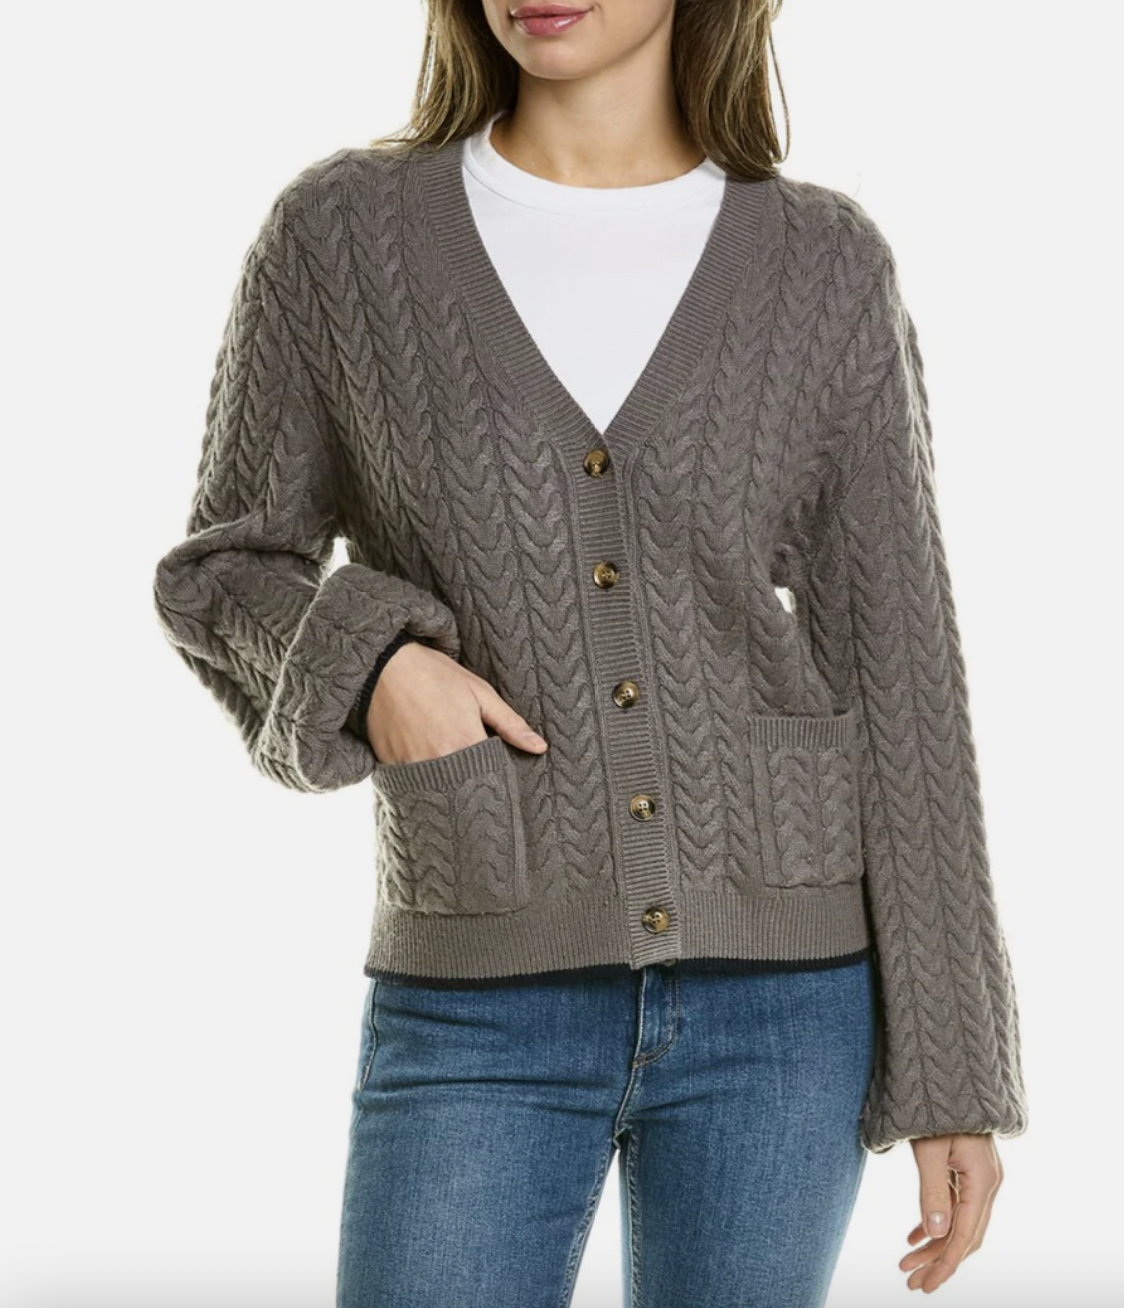 Katie Maloney's Grey Cable Knit Cardigan Sweater